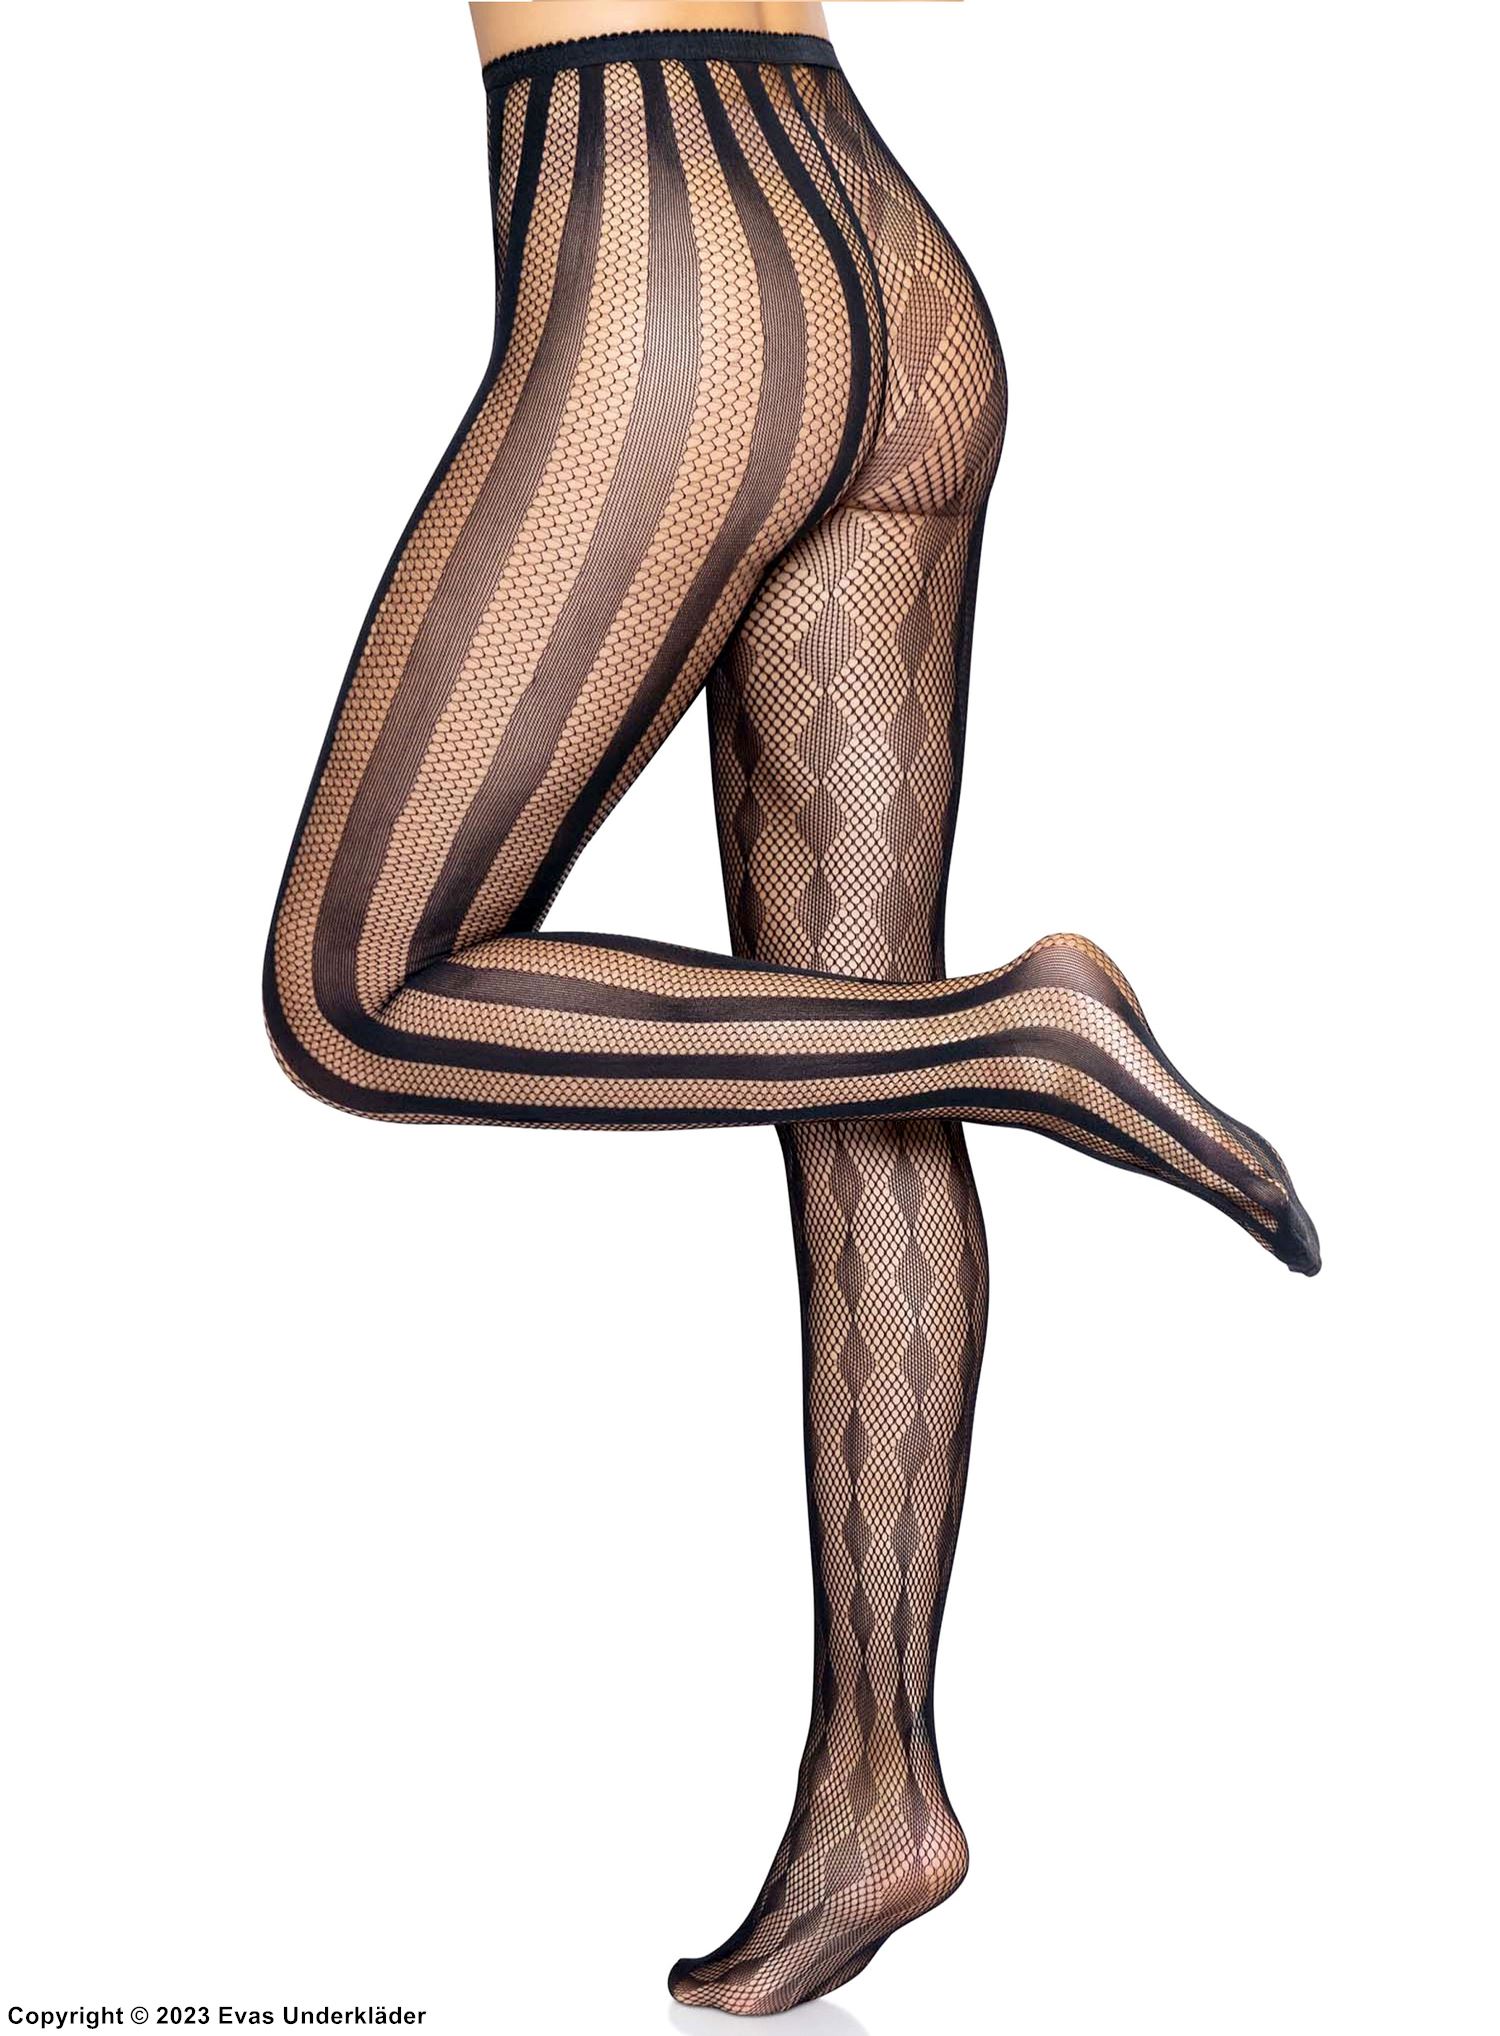 Pantyhose, harlequin with stripes and diamonds